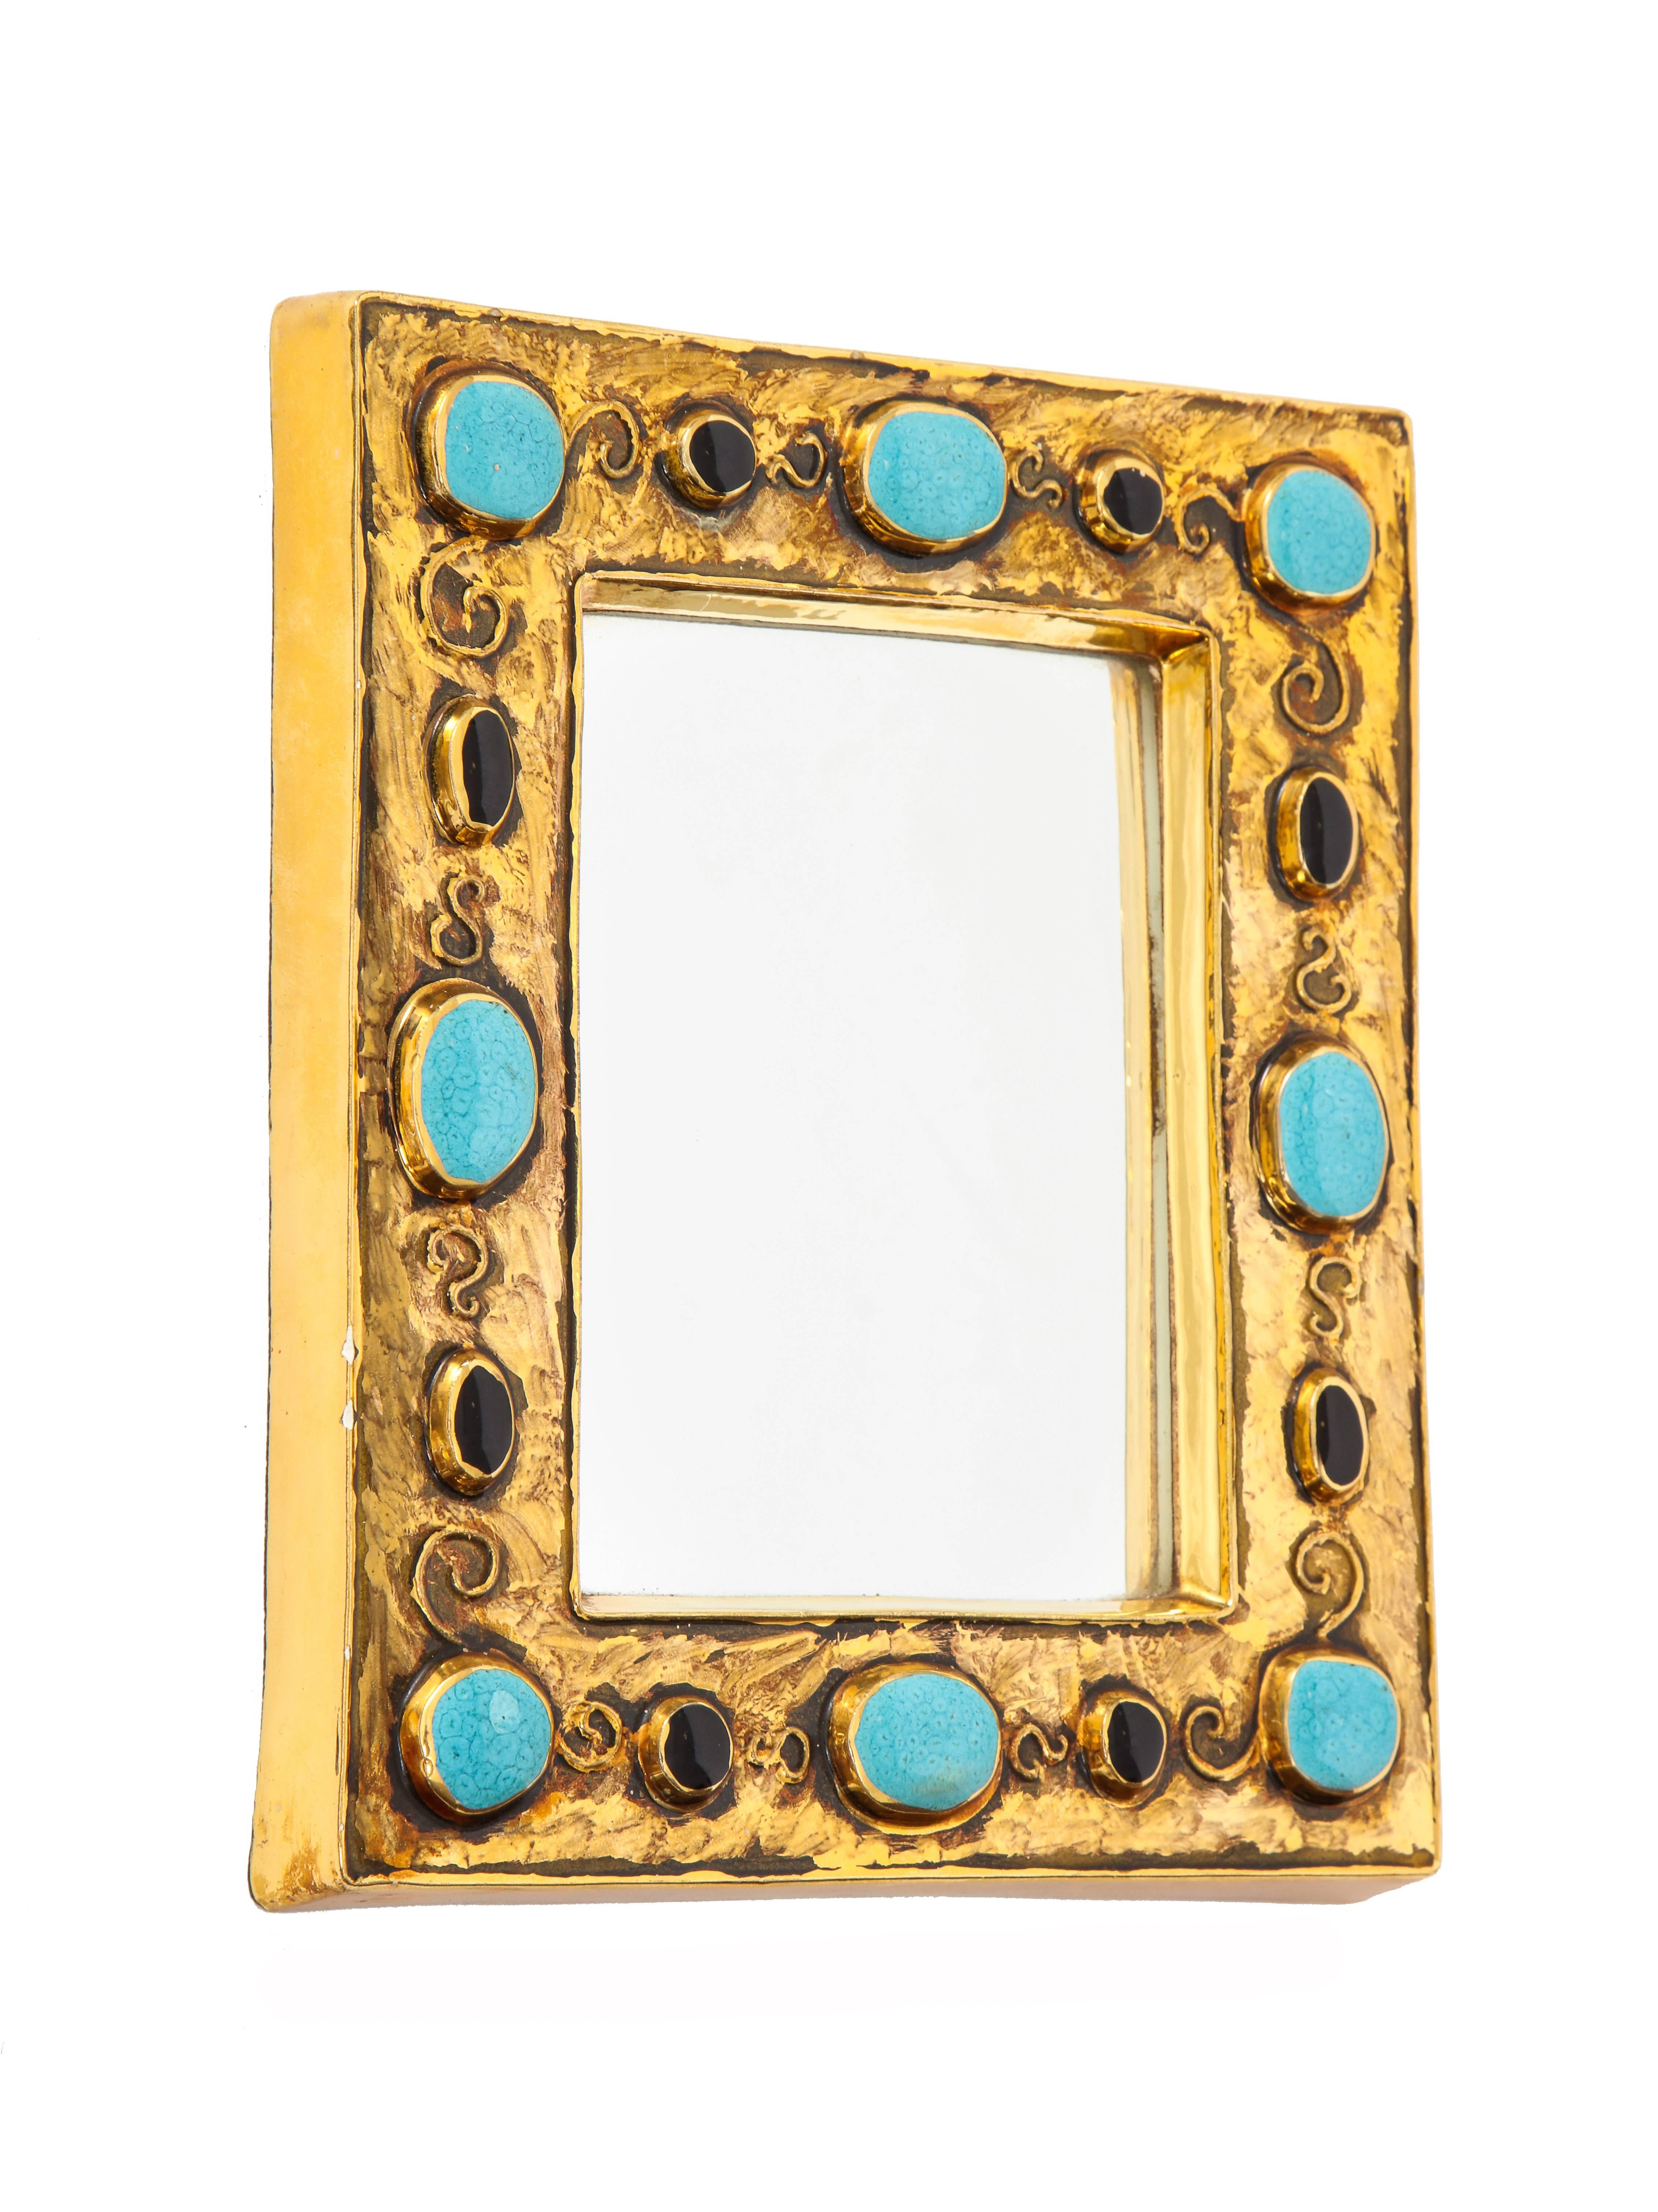 Francois Lembo mirror, ceramic, jeweled, gold, black, and turquoise, signed. Small scale gold glazed mirror with embedded jewel decorations. Signed F. Lembo with incised signature on verso, in addition to being stamped Lembo.

A native of